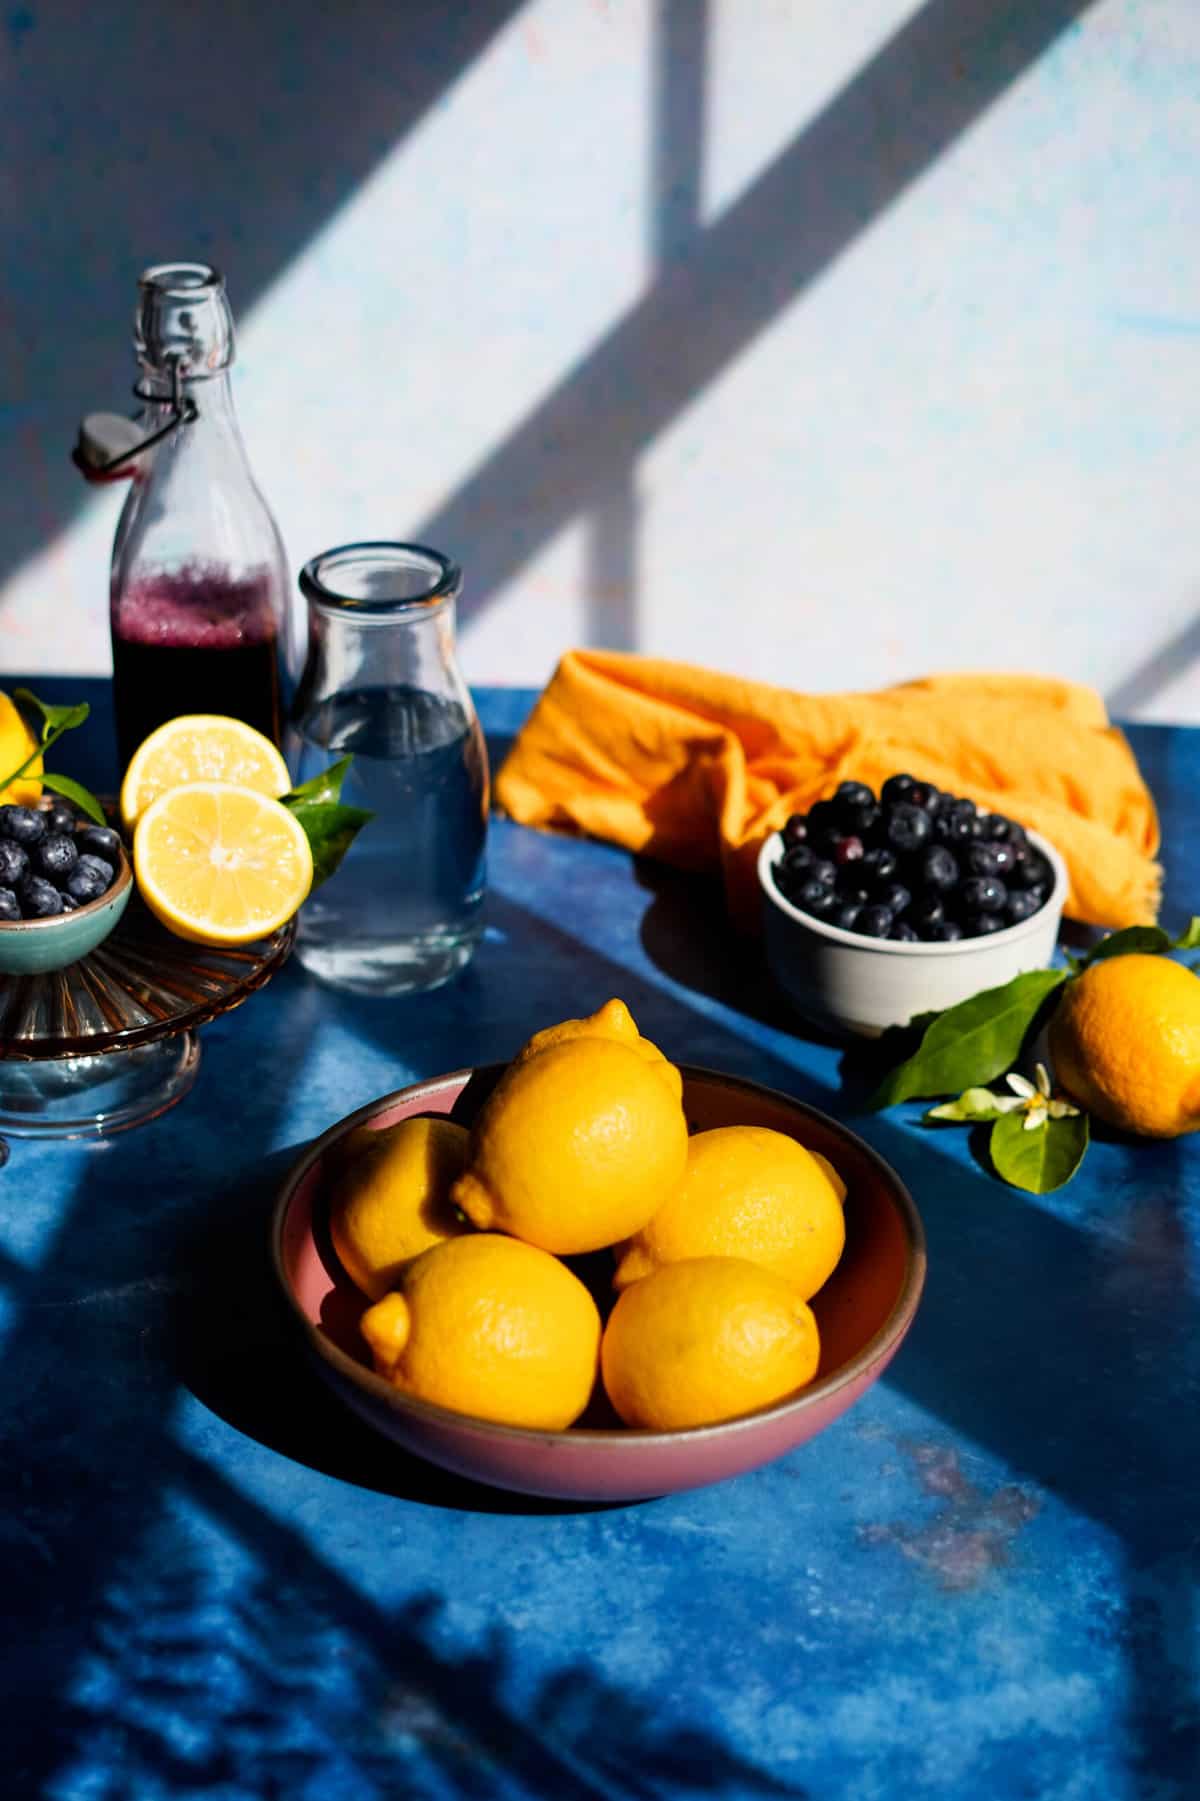 ingredients to make blueberry lemonade are sitting on a countertop, including lemons in a pink ceramic bowl, blueberries in a white ceramic bowl, and a bottle of blueberry simple syrup.